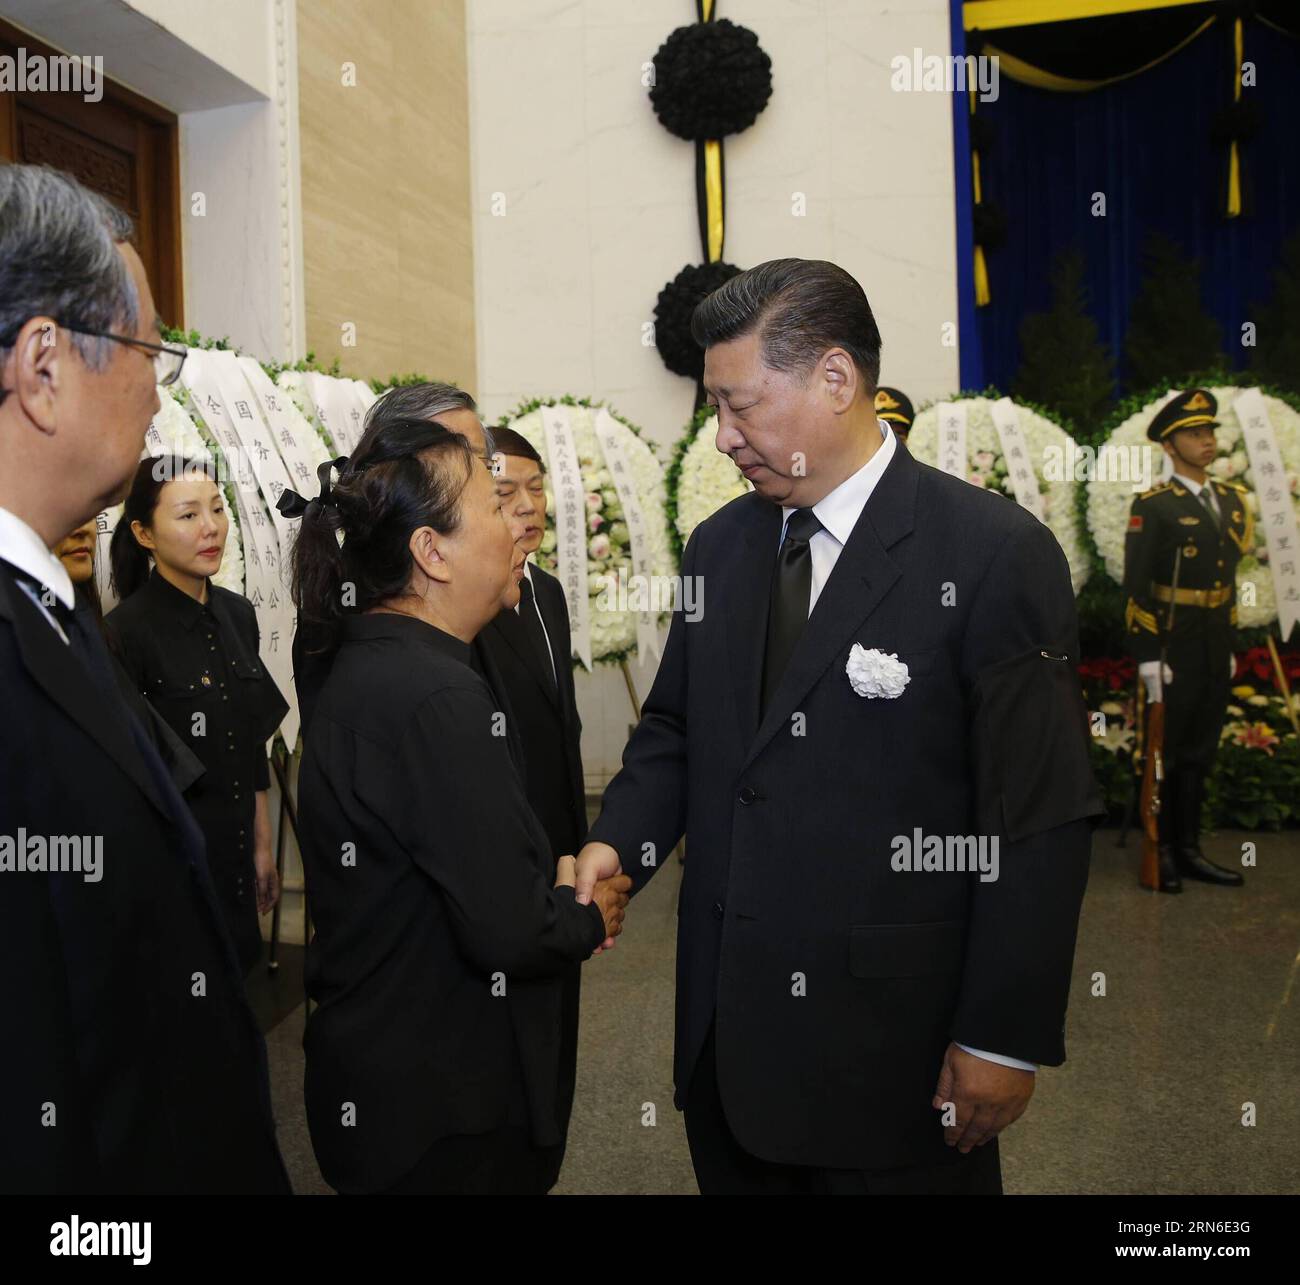 (150722) -- BEIJING, July 22, 2015 -- Chinese President Xi Jinping (R, front) shakes hands with a family member of Wan Li, former chairman of the National People s Congress (NPC) Standing Committee, during Wan s funeral at Babaoshan Revolutionary Cemetery in Beijing, capital of China, July 22, 2015. The body of Wan Li was cremated on Wednesday morning in Beijing. )(mcg) CHINA-BEIJING-WAN LI-CREMATION (CN) JuxPeng PUBLICATIONxNOTxINxCHN   150722 Beijing July 22 2015 Chinese President Xi Jinping r Front Shakes Hands With a Family member of Wan left Former Chairman of The National Celebrities S C Stock Photo